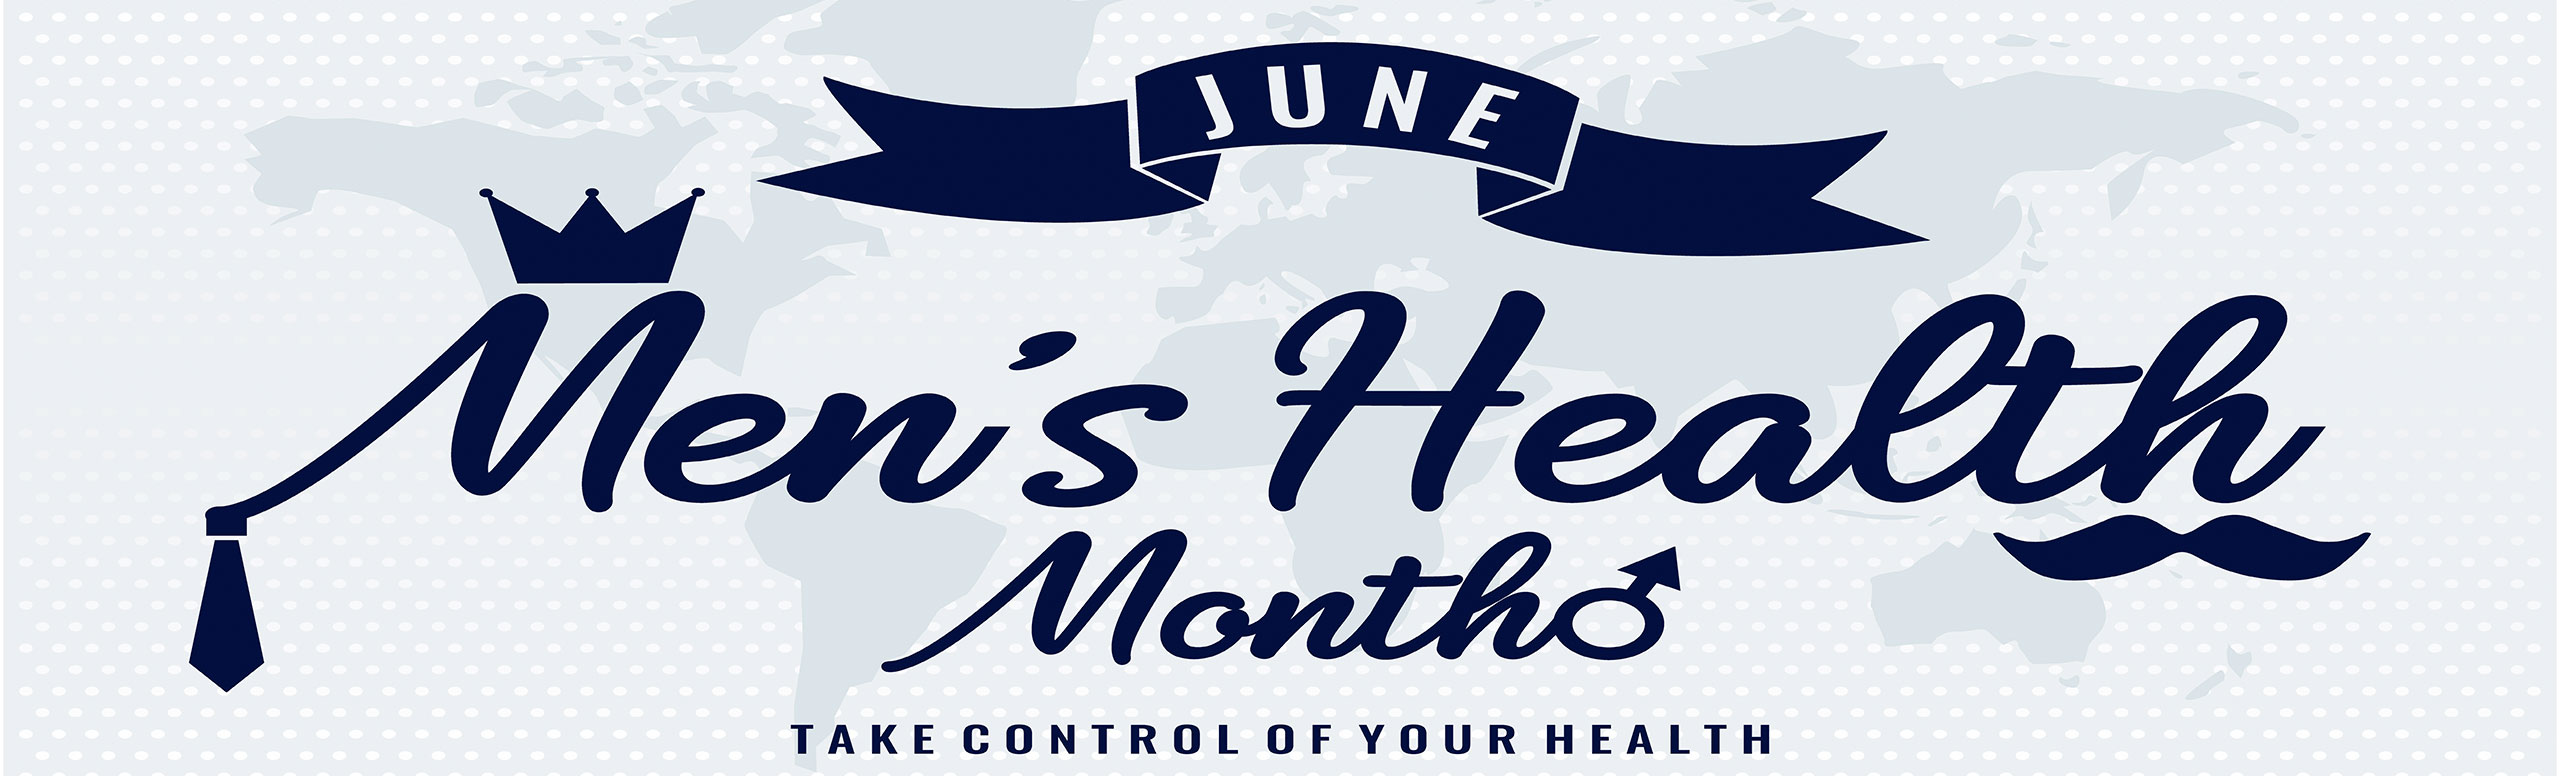 Banner picture of the World Map. Banner says:

JUNE
Men's Health Month
TAKE CONTROL OF YOUR HEALTH